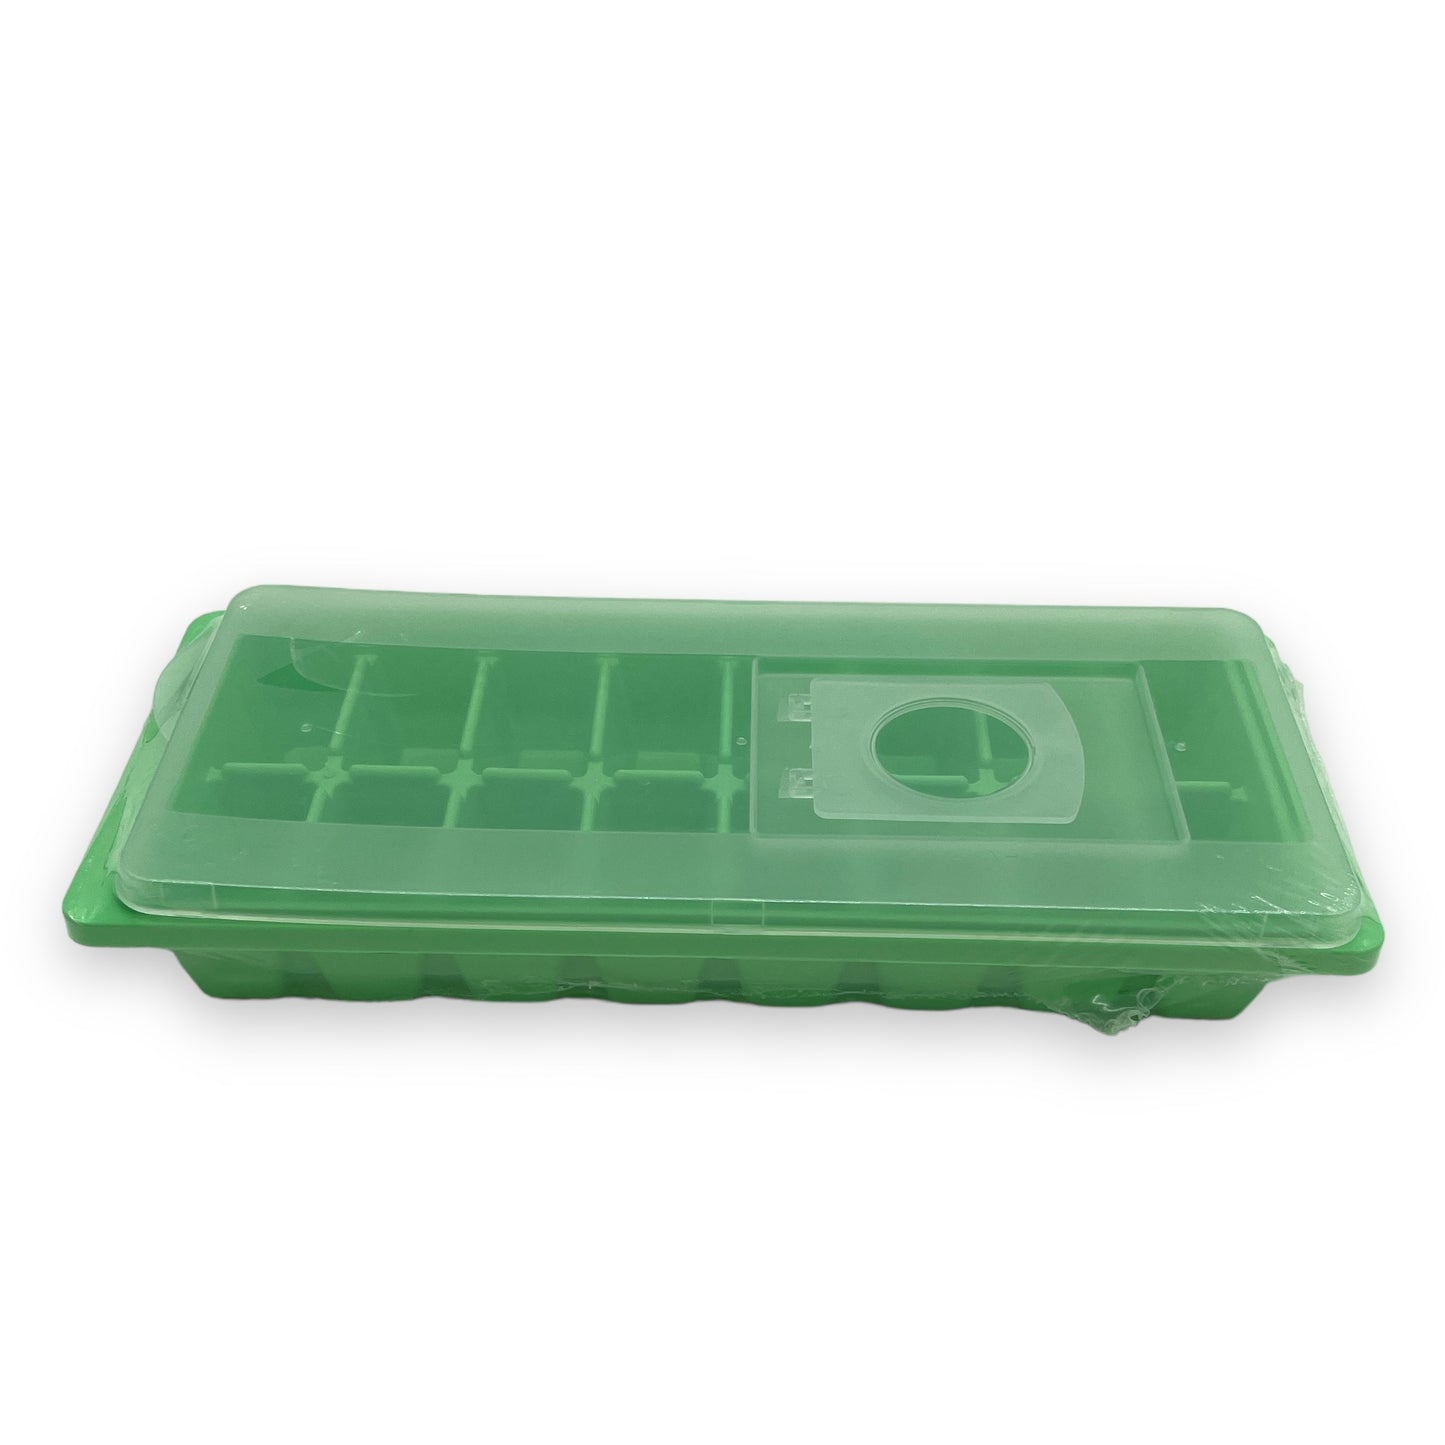 Ice cube maker 4 colors